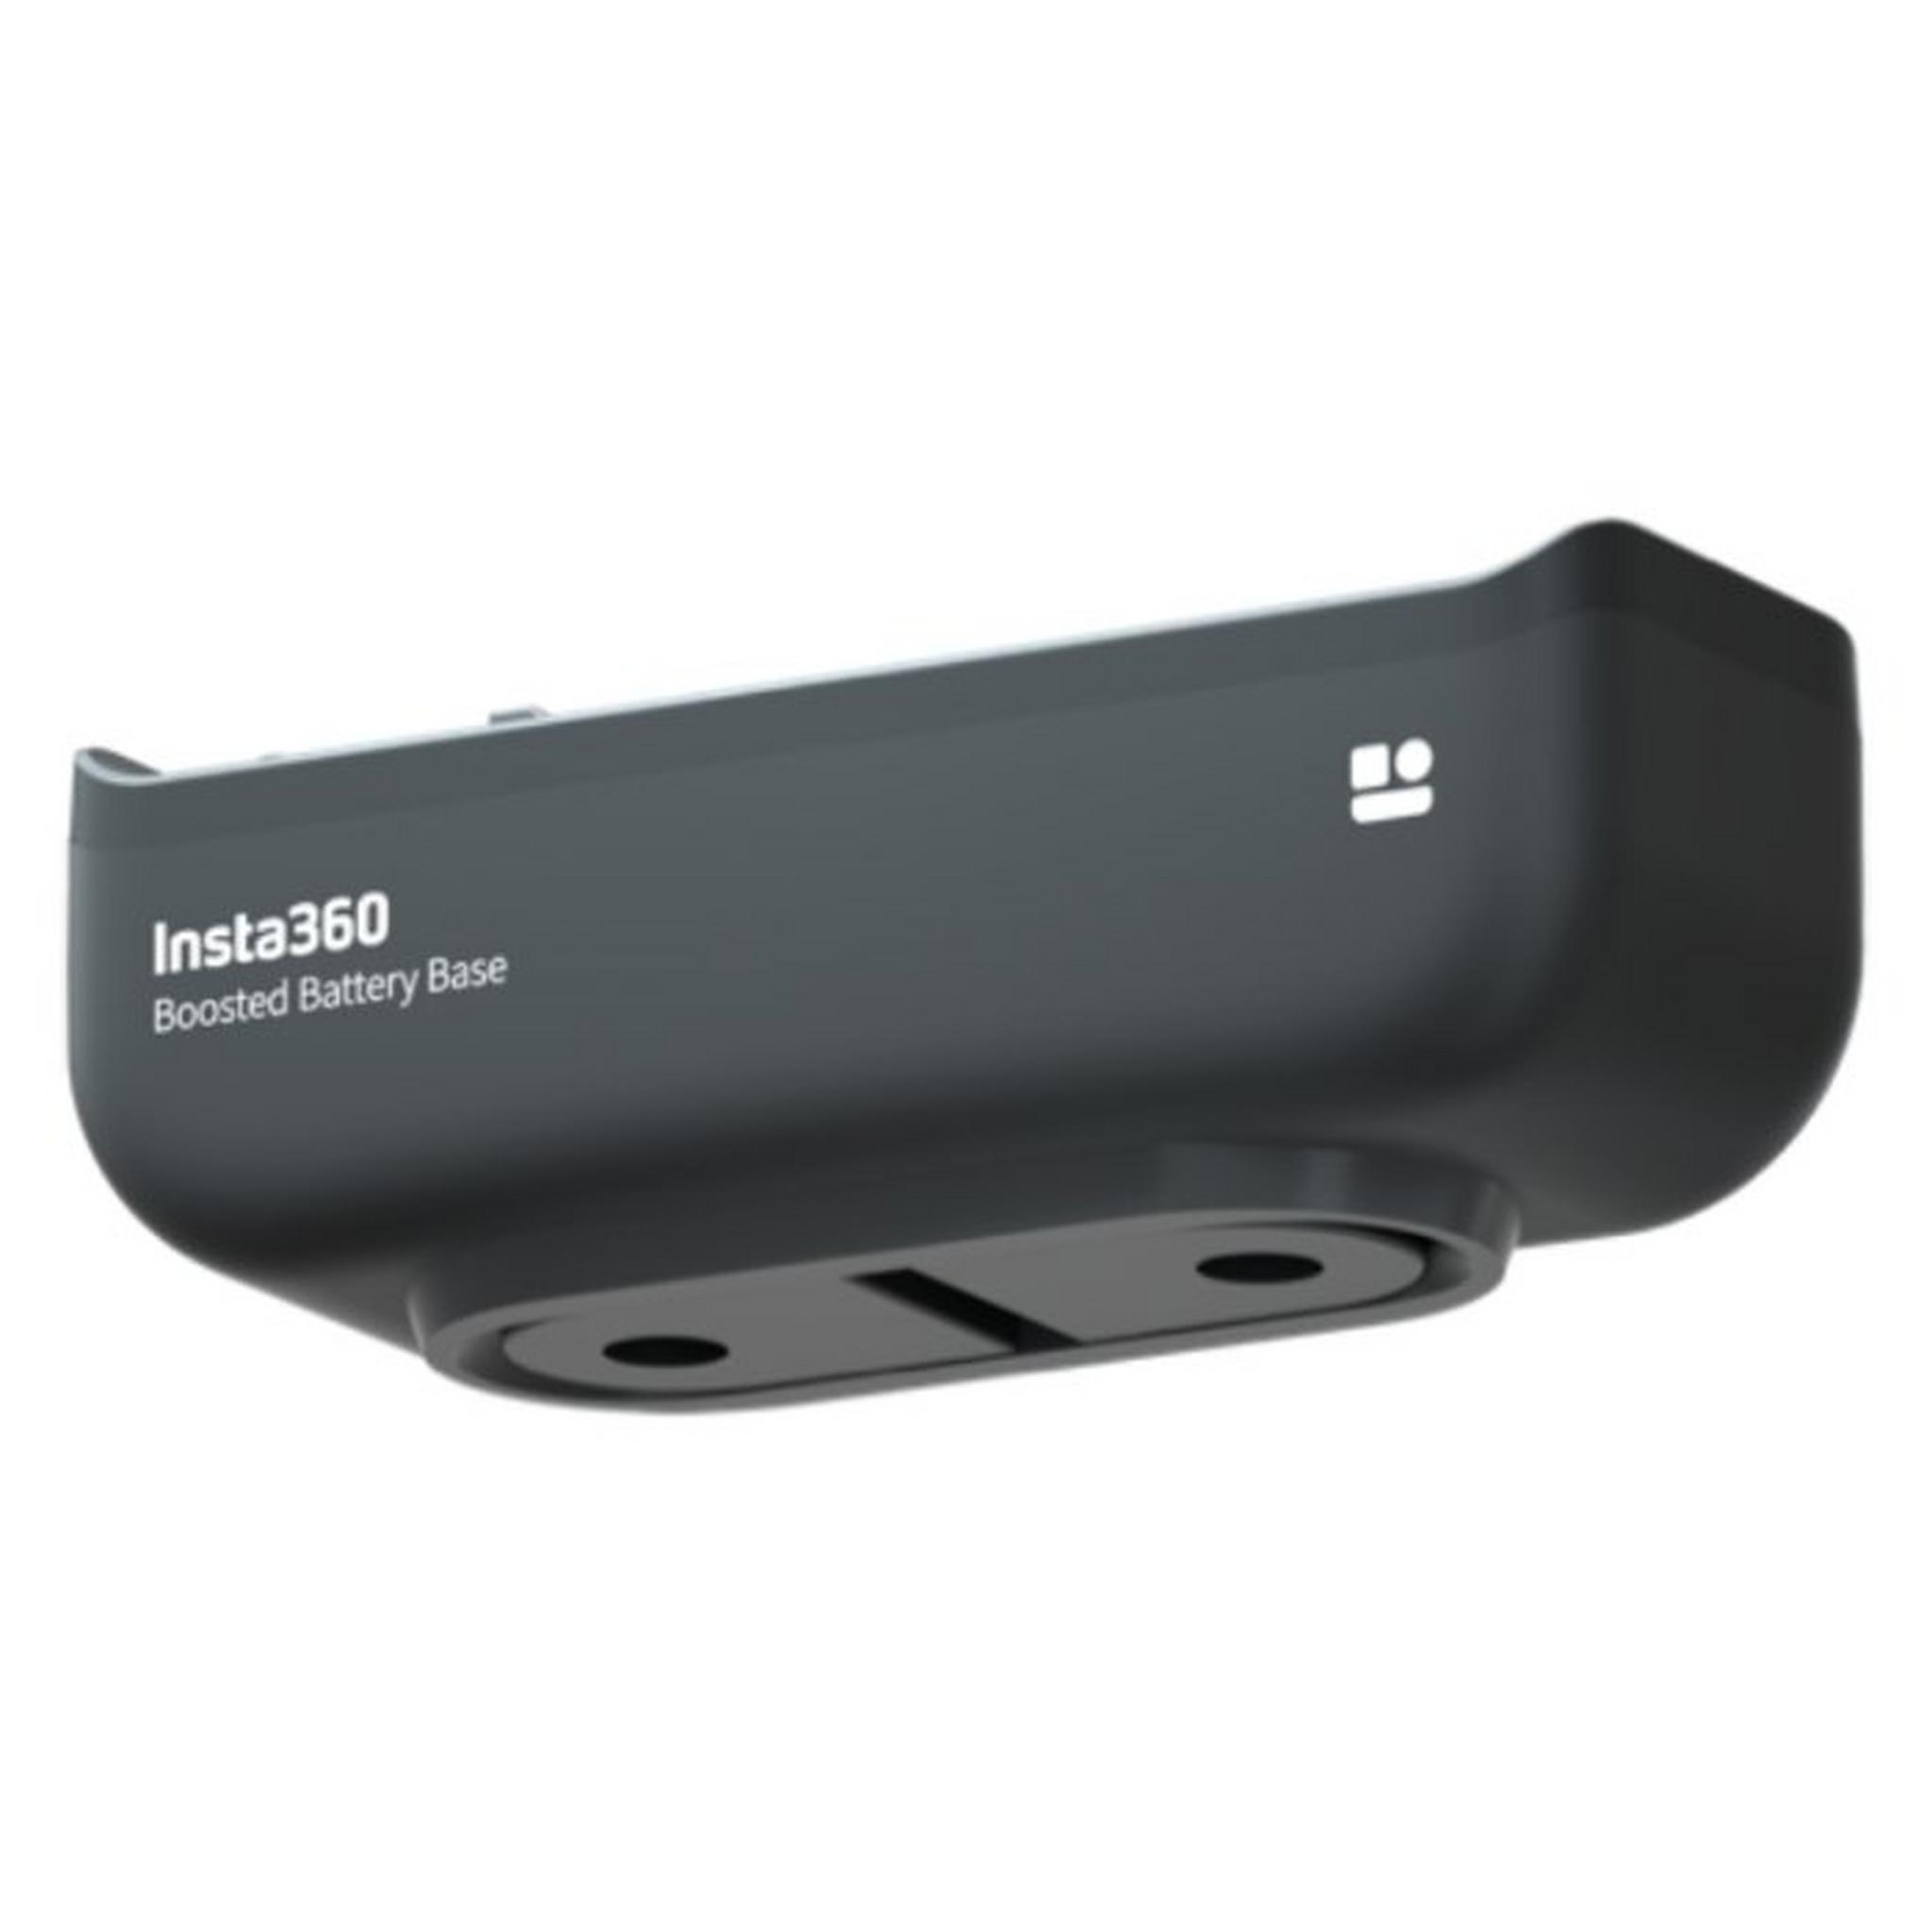 Insta360 One R Boosted Battery Base